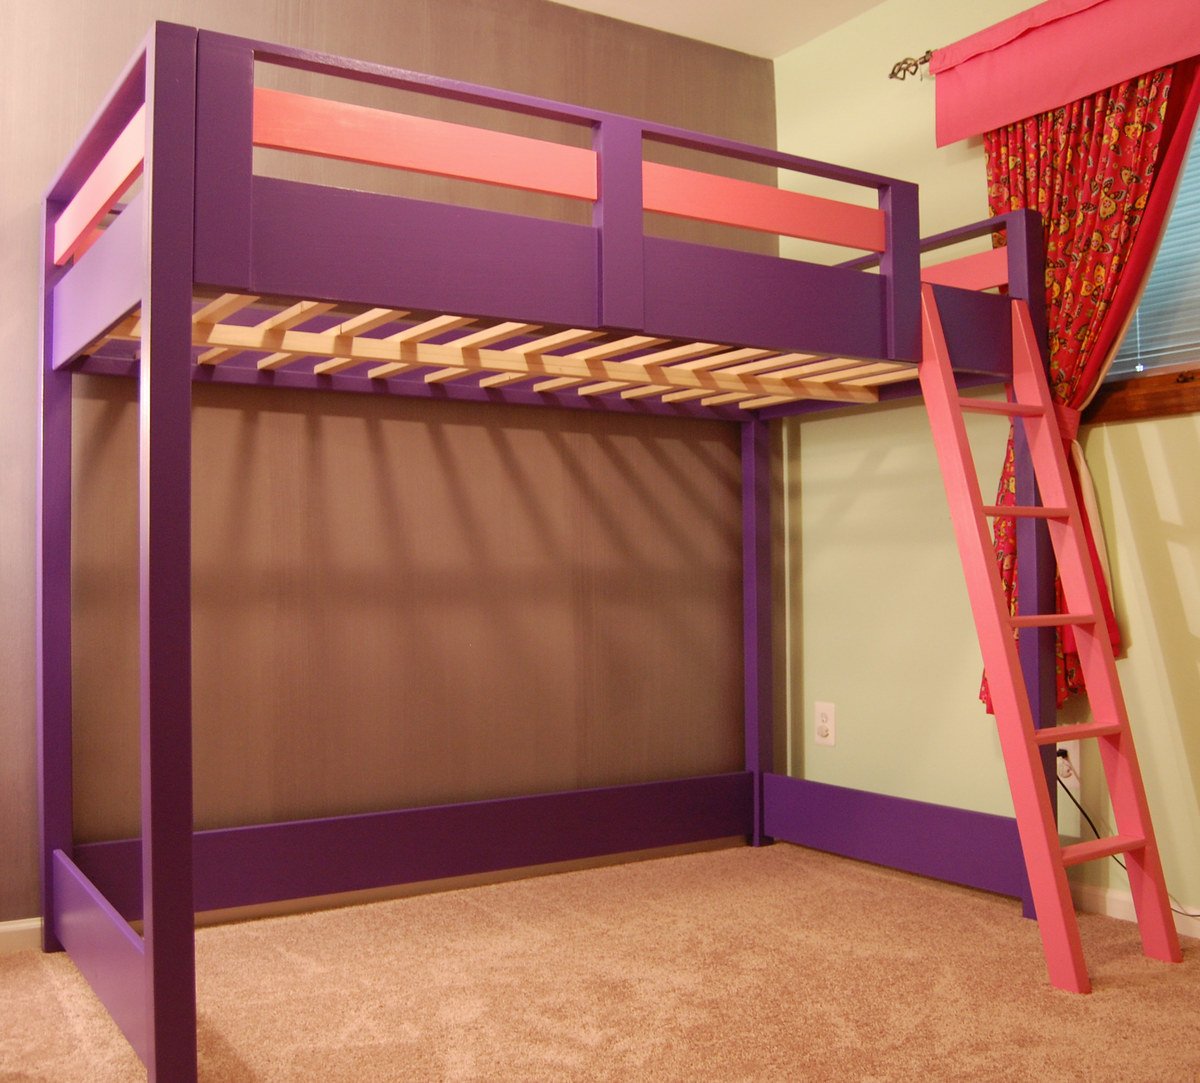 Sleep and play loft bed | Do It Yourself Home Projects from Ana White